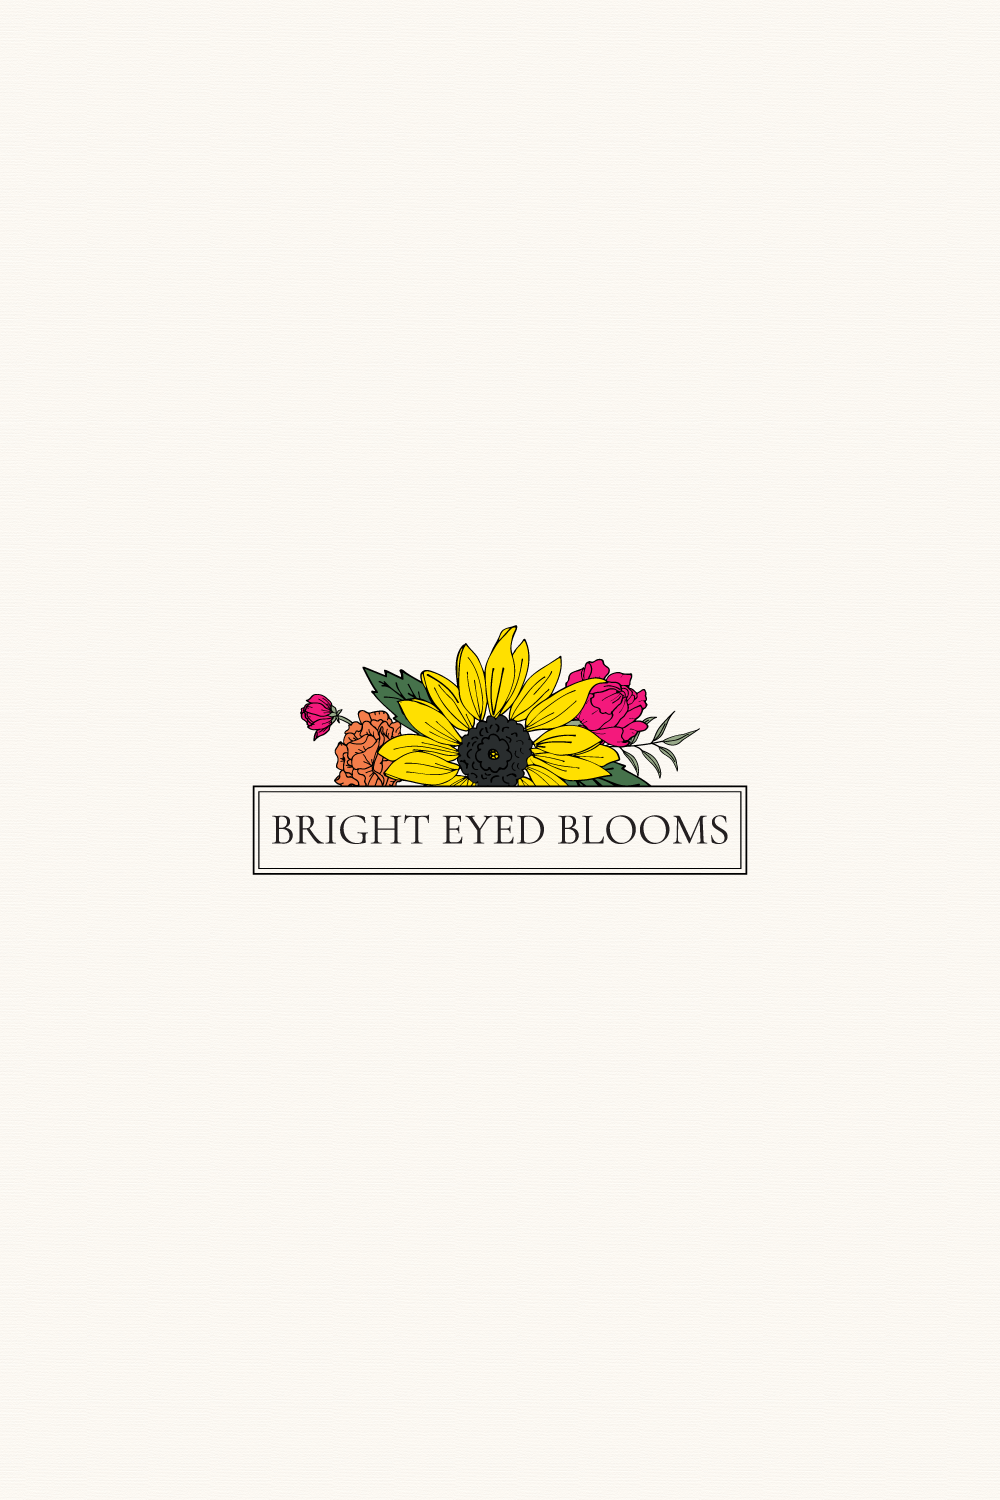 Bright Eyed Blooms primary logo